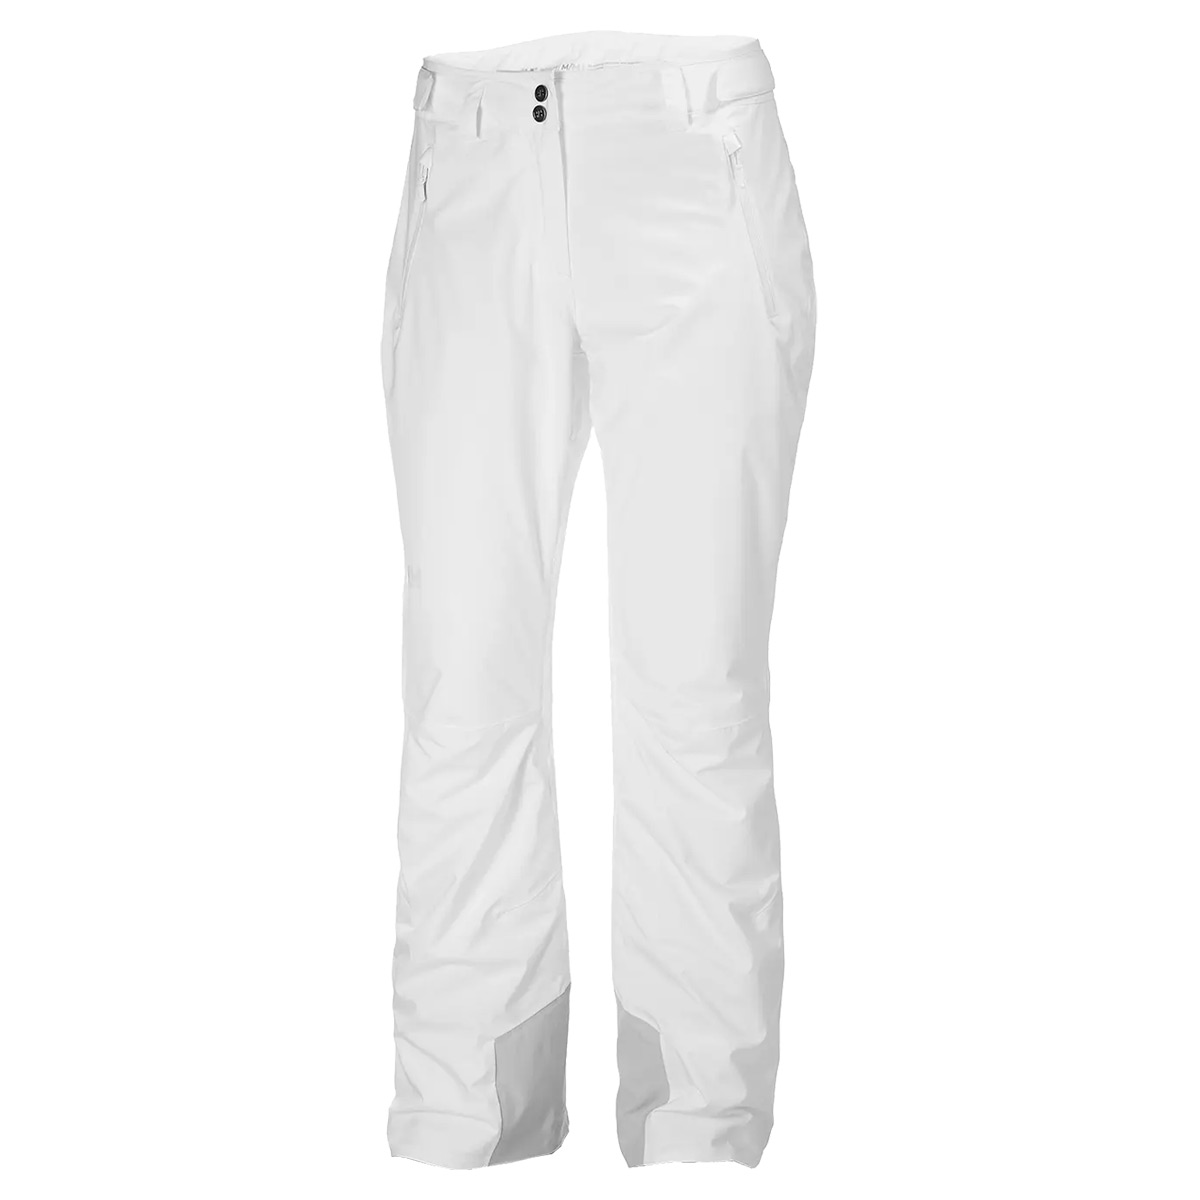 W LEGENDARY INSULATED PANT Helly Hansen